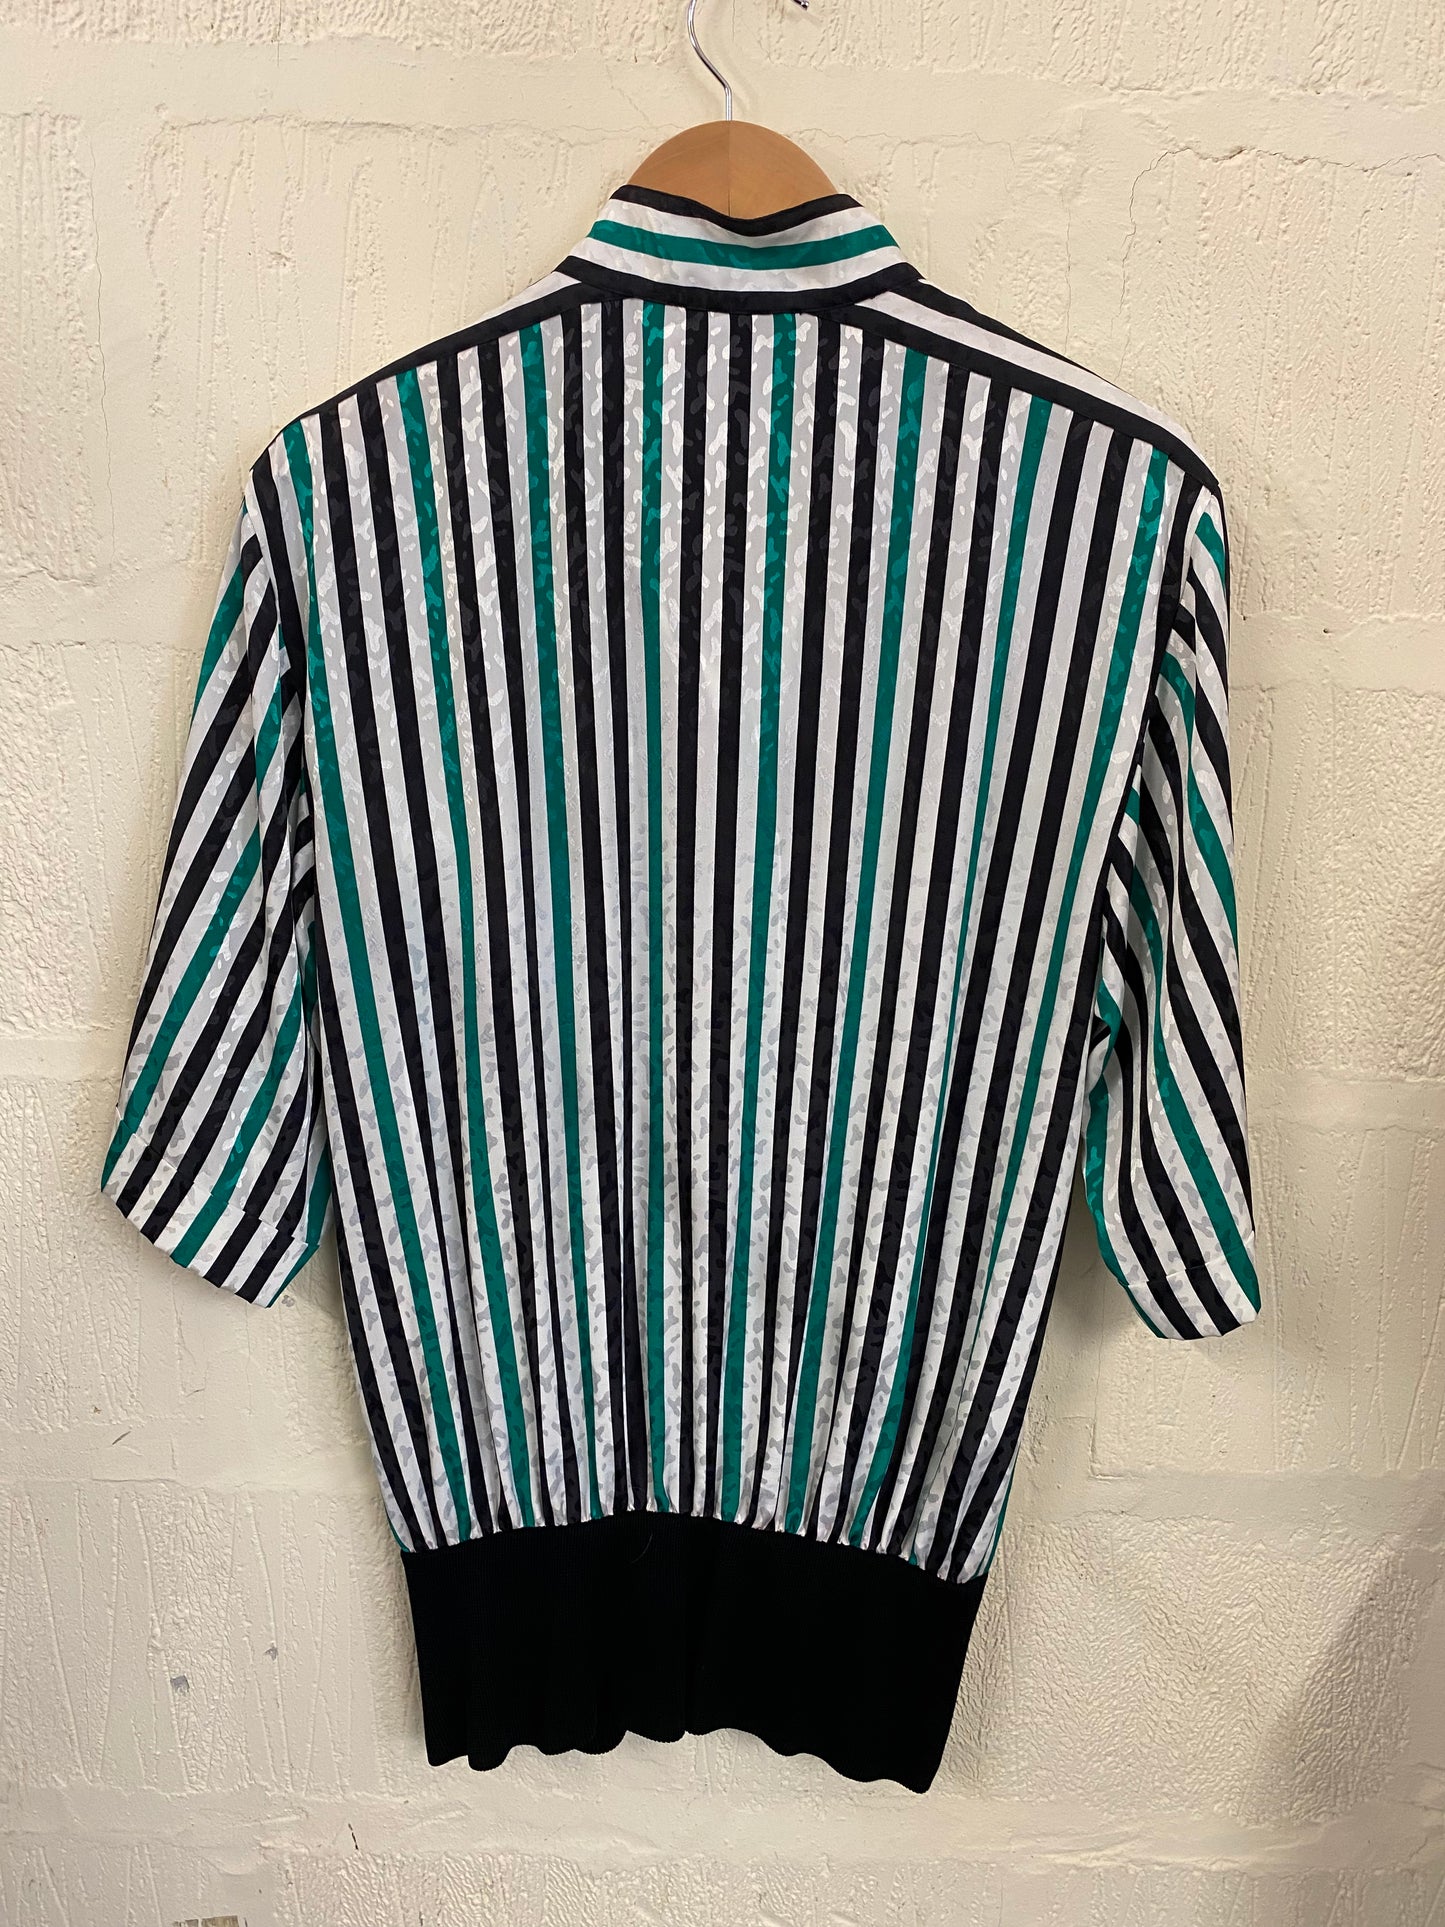 Vintage Fink 1980s Green and Black Striped Blouse Size 16